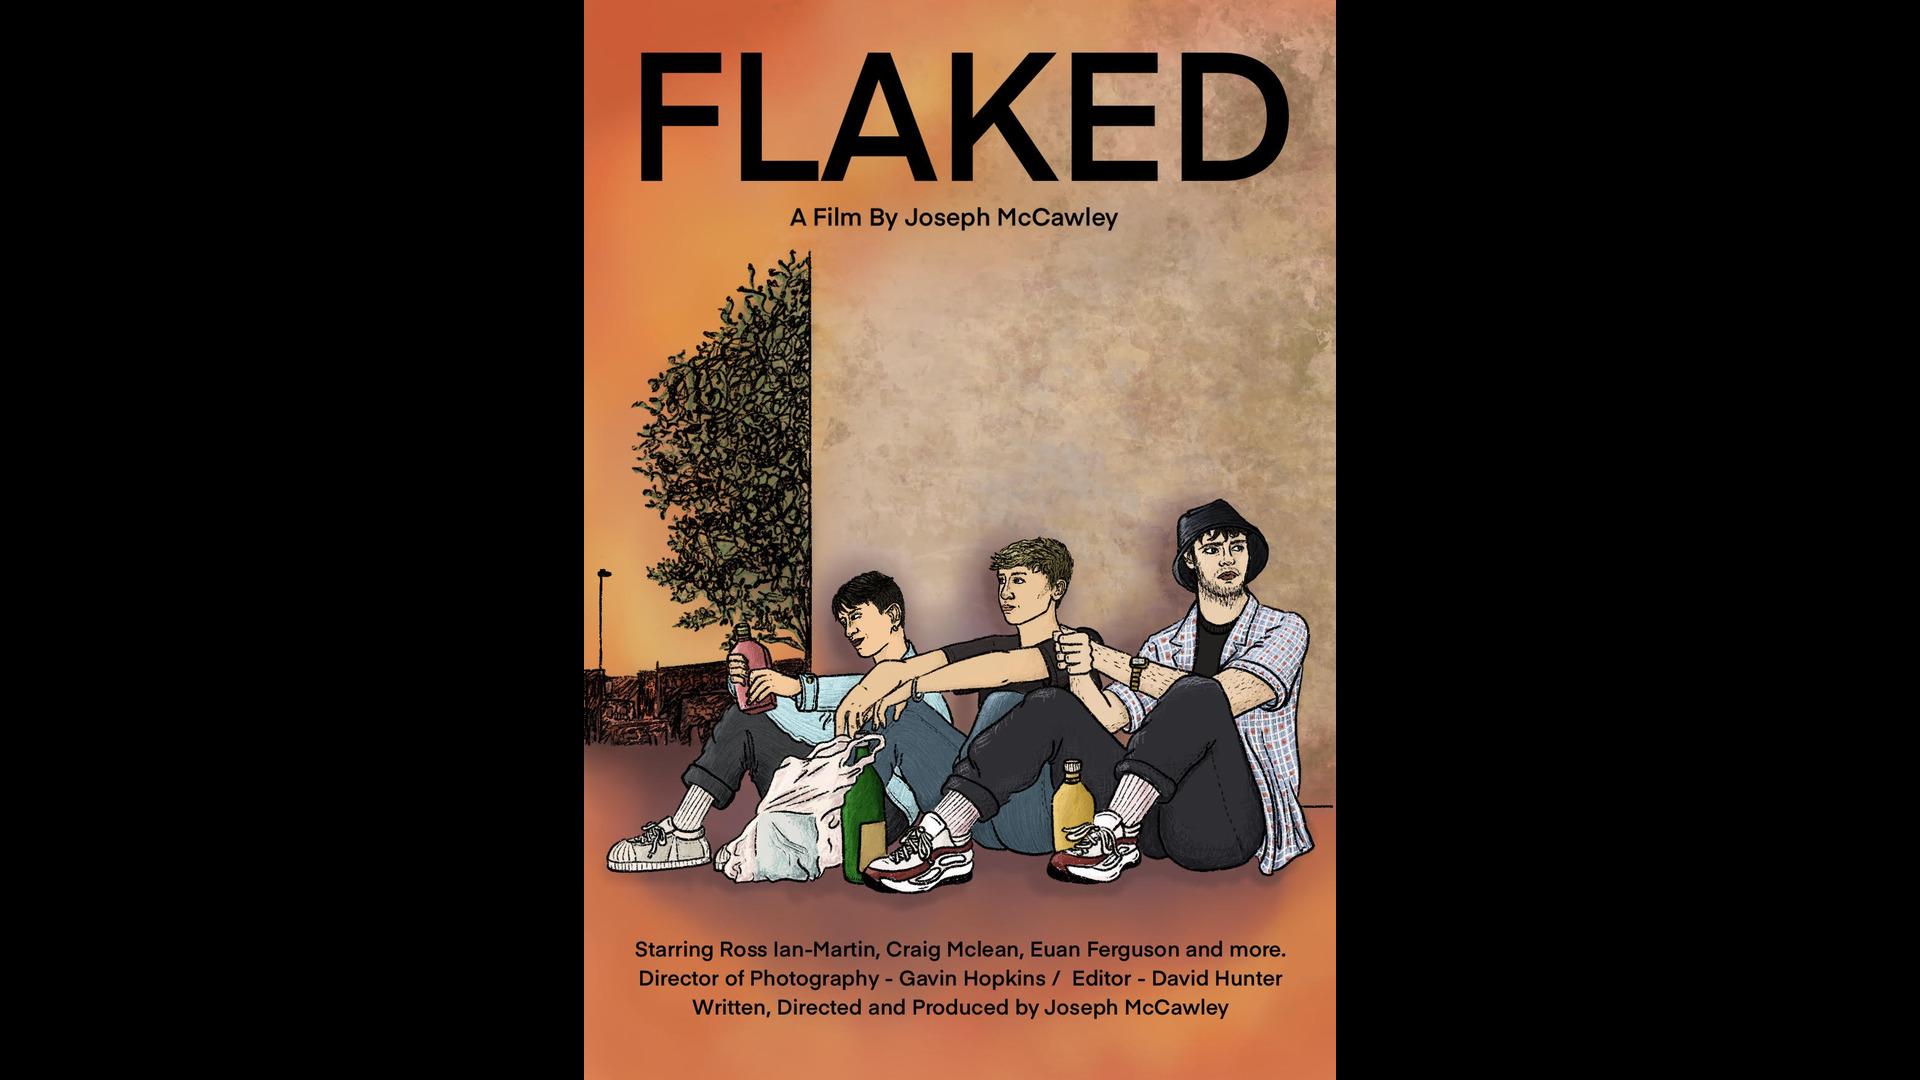 FLAKED